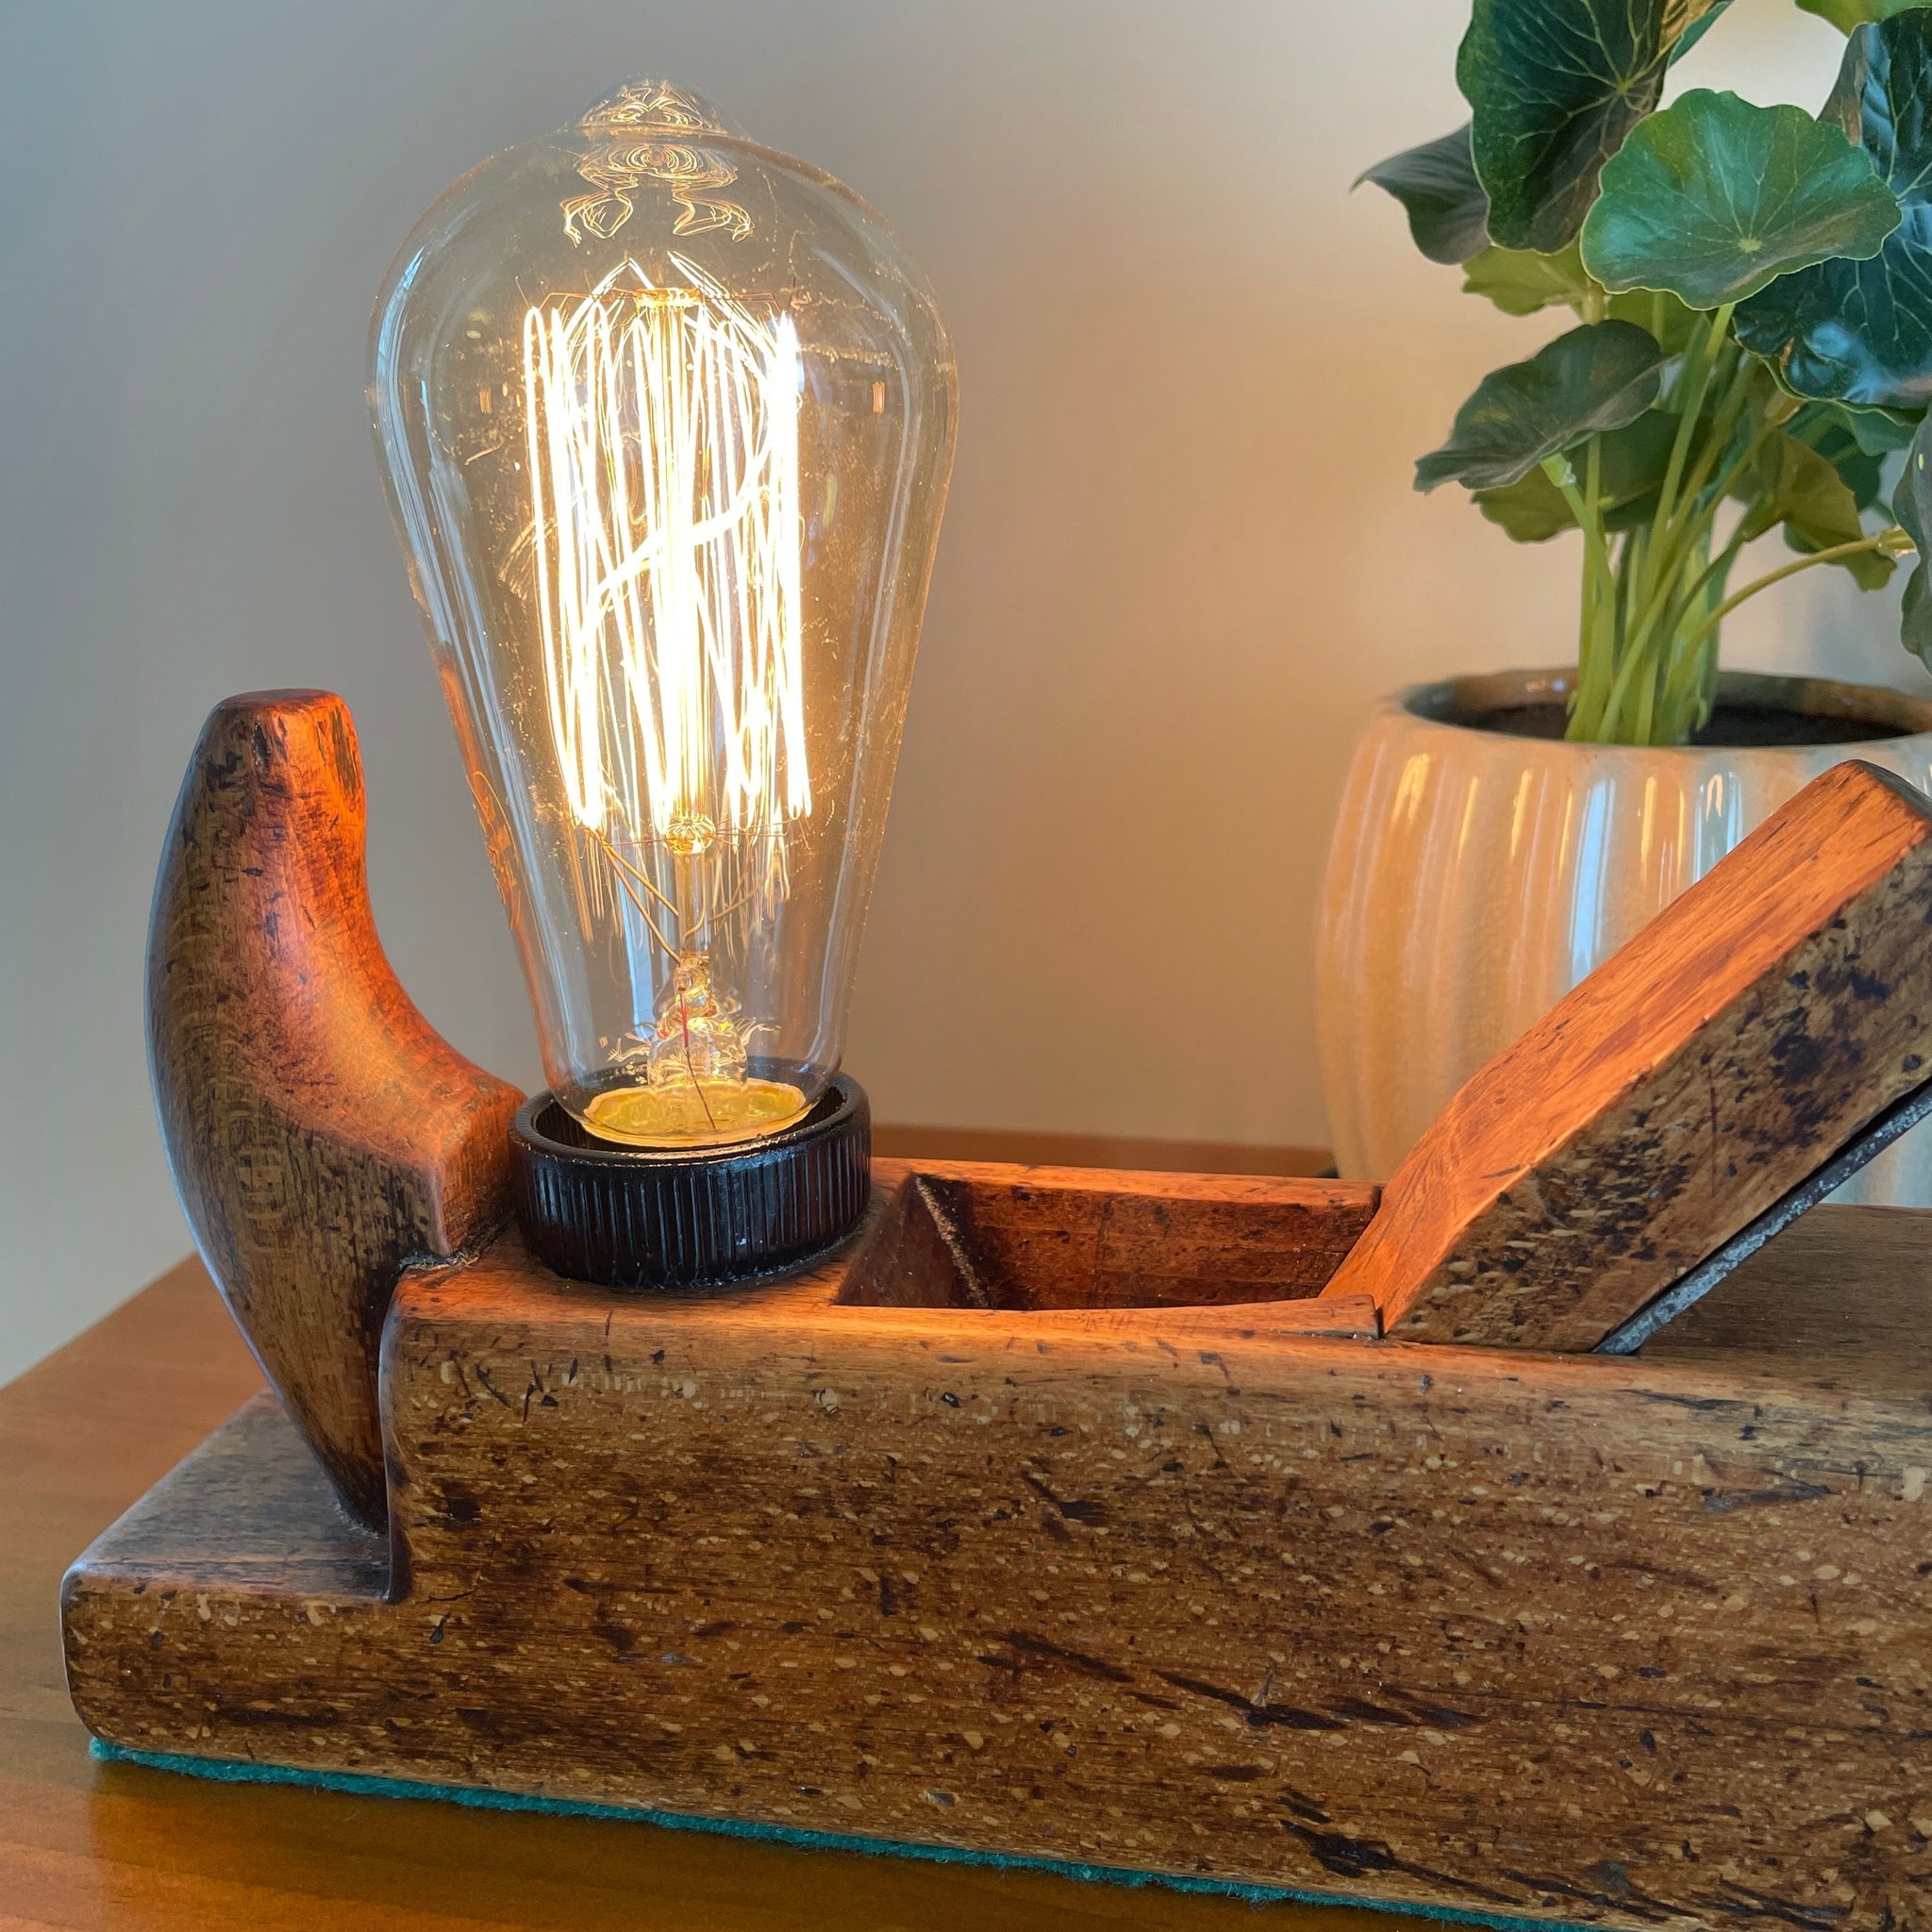 Shades at Grays Edison Lamp Edison Table Lamp - Wood plane series #3 handcrafted lighting made in new zealand